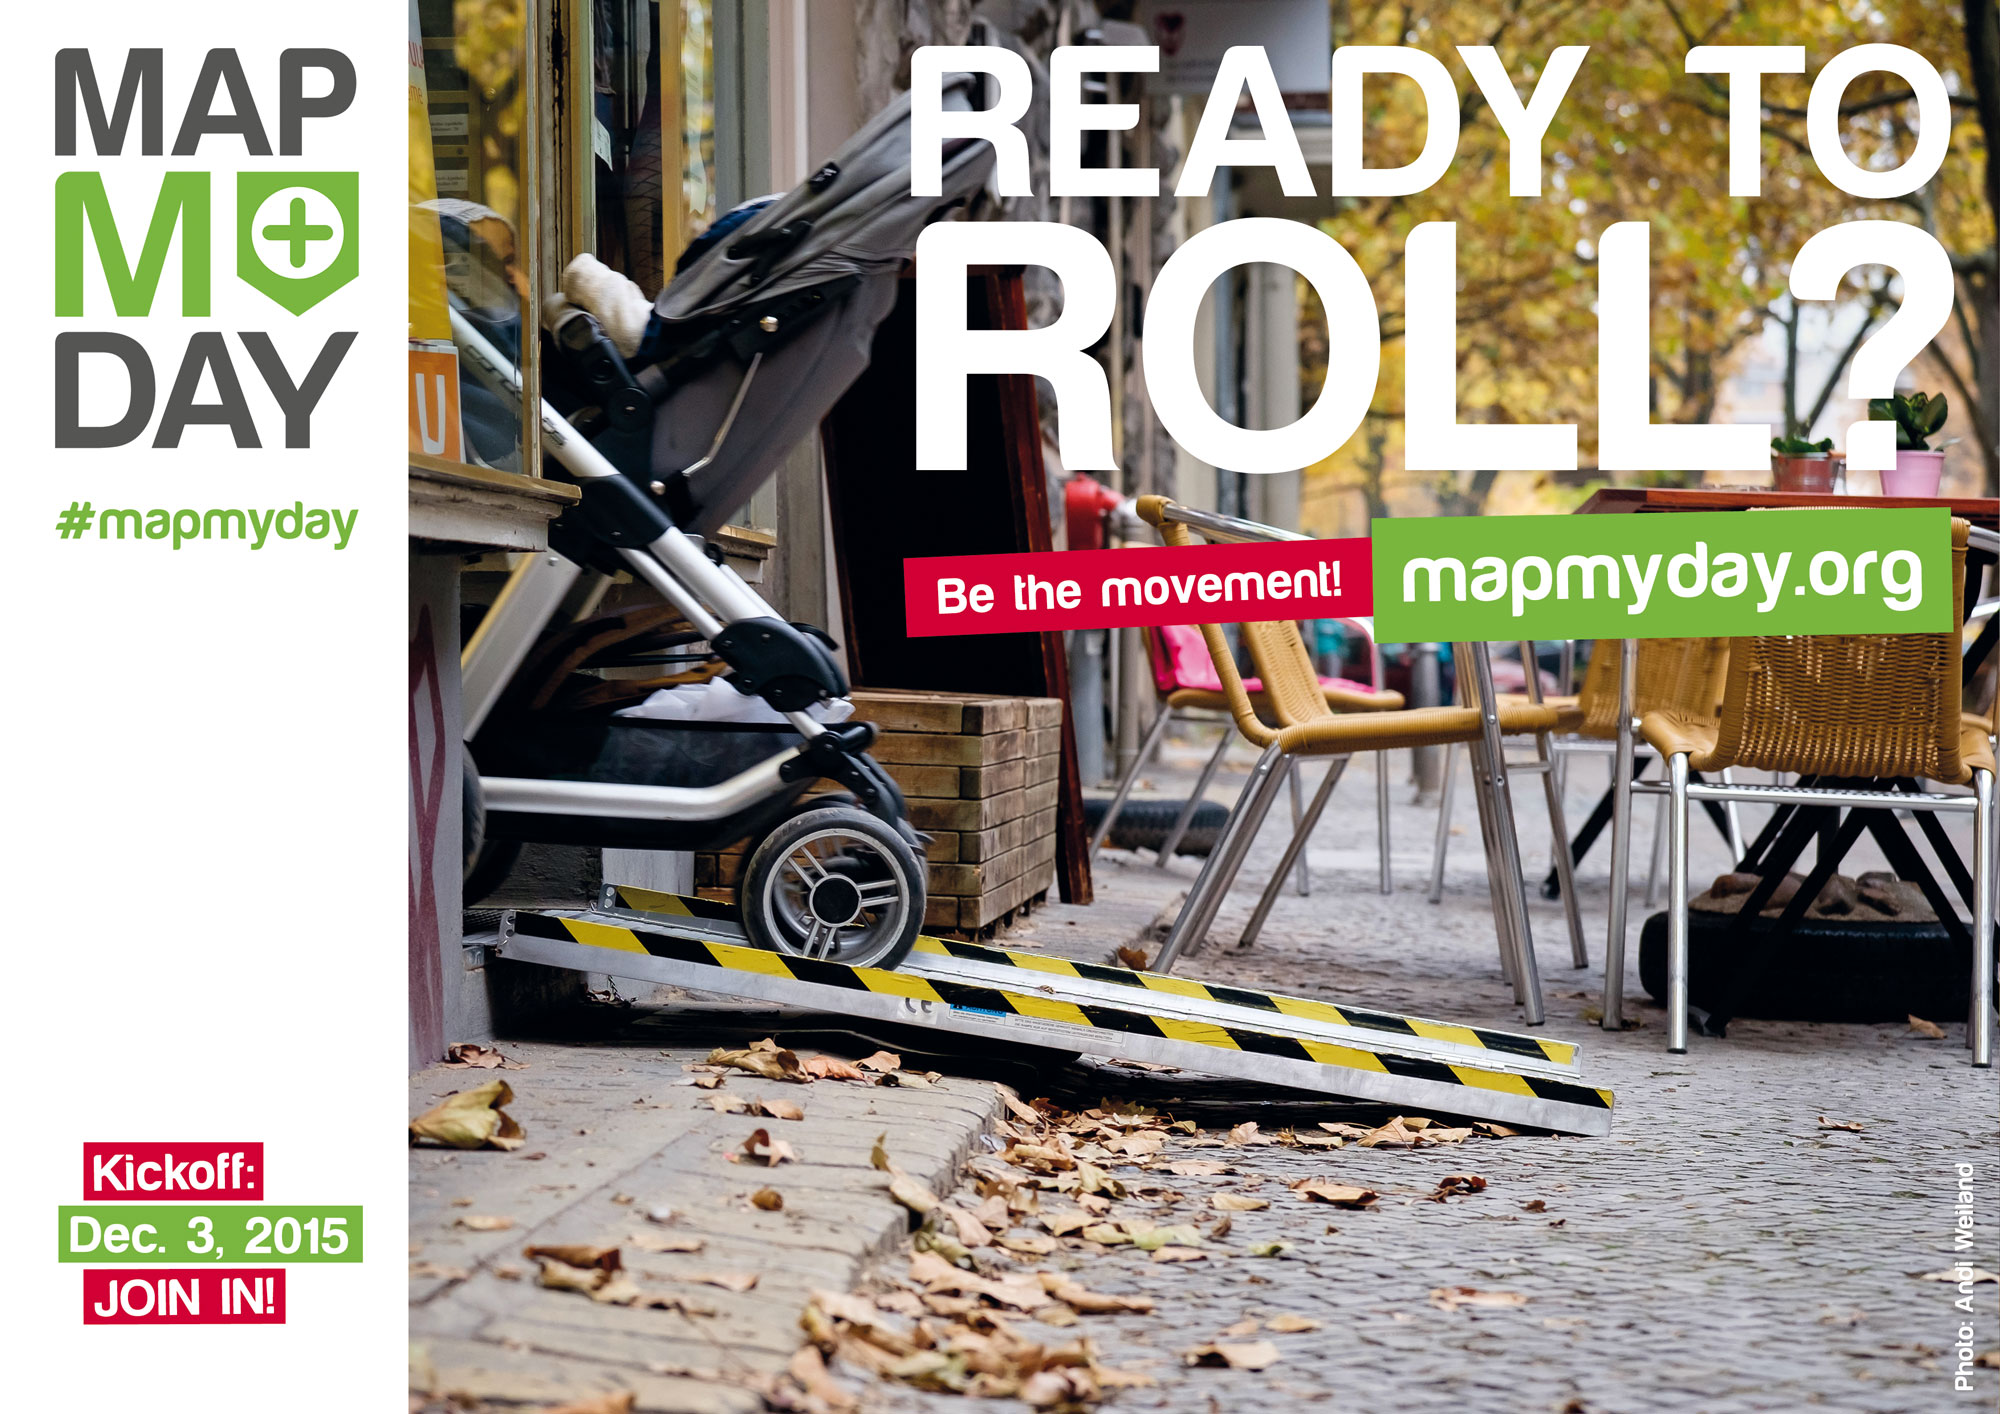 MapMyDay image of pushchair exiting building on temprorary ramp 